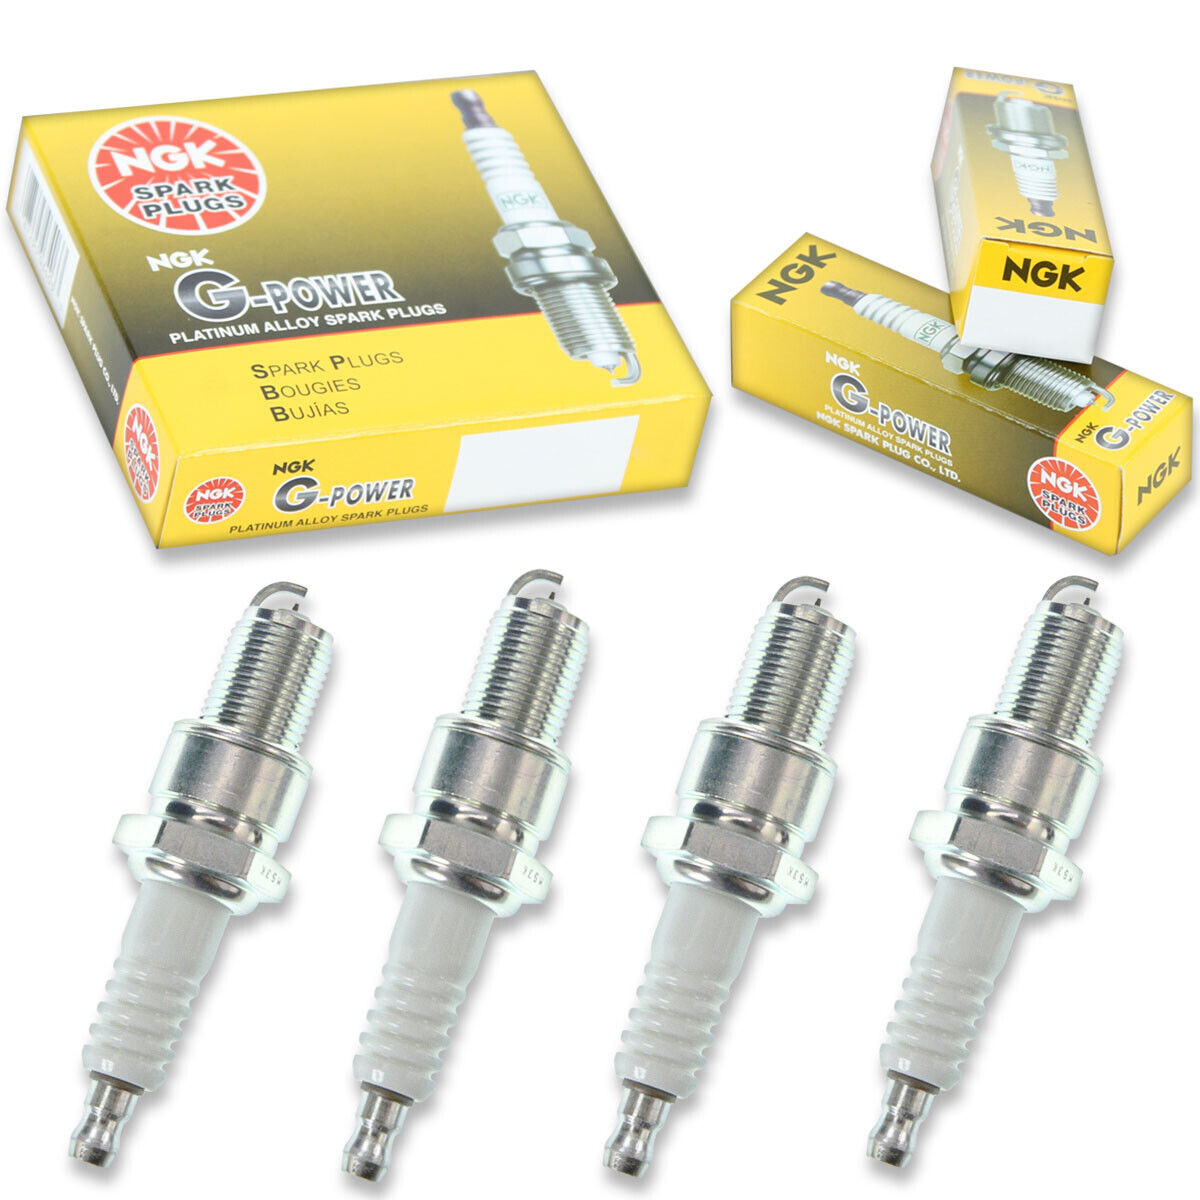 4 pc NGK G-Power Exhaust Side Spark Plugs for 1981-1986 Nissan 720 2.0L 2.2L xb